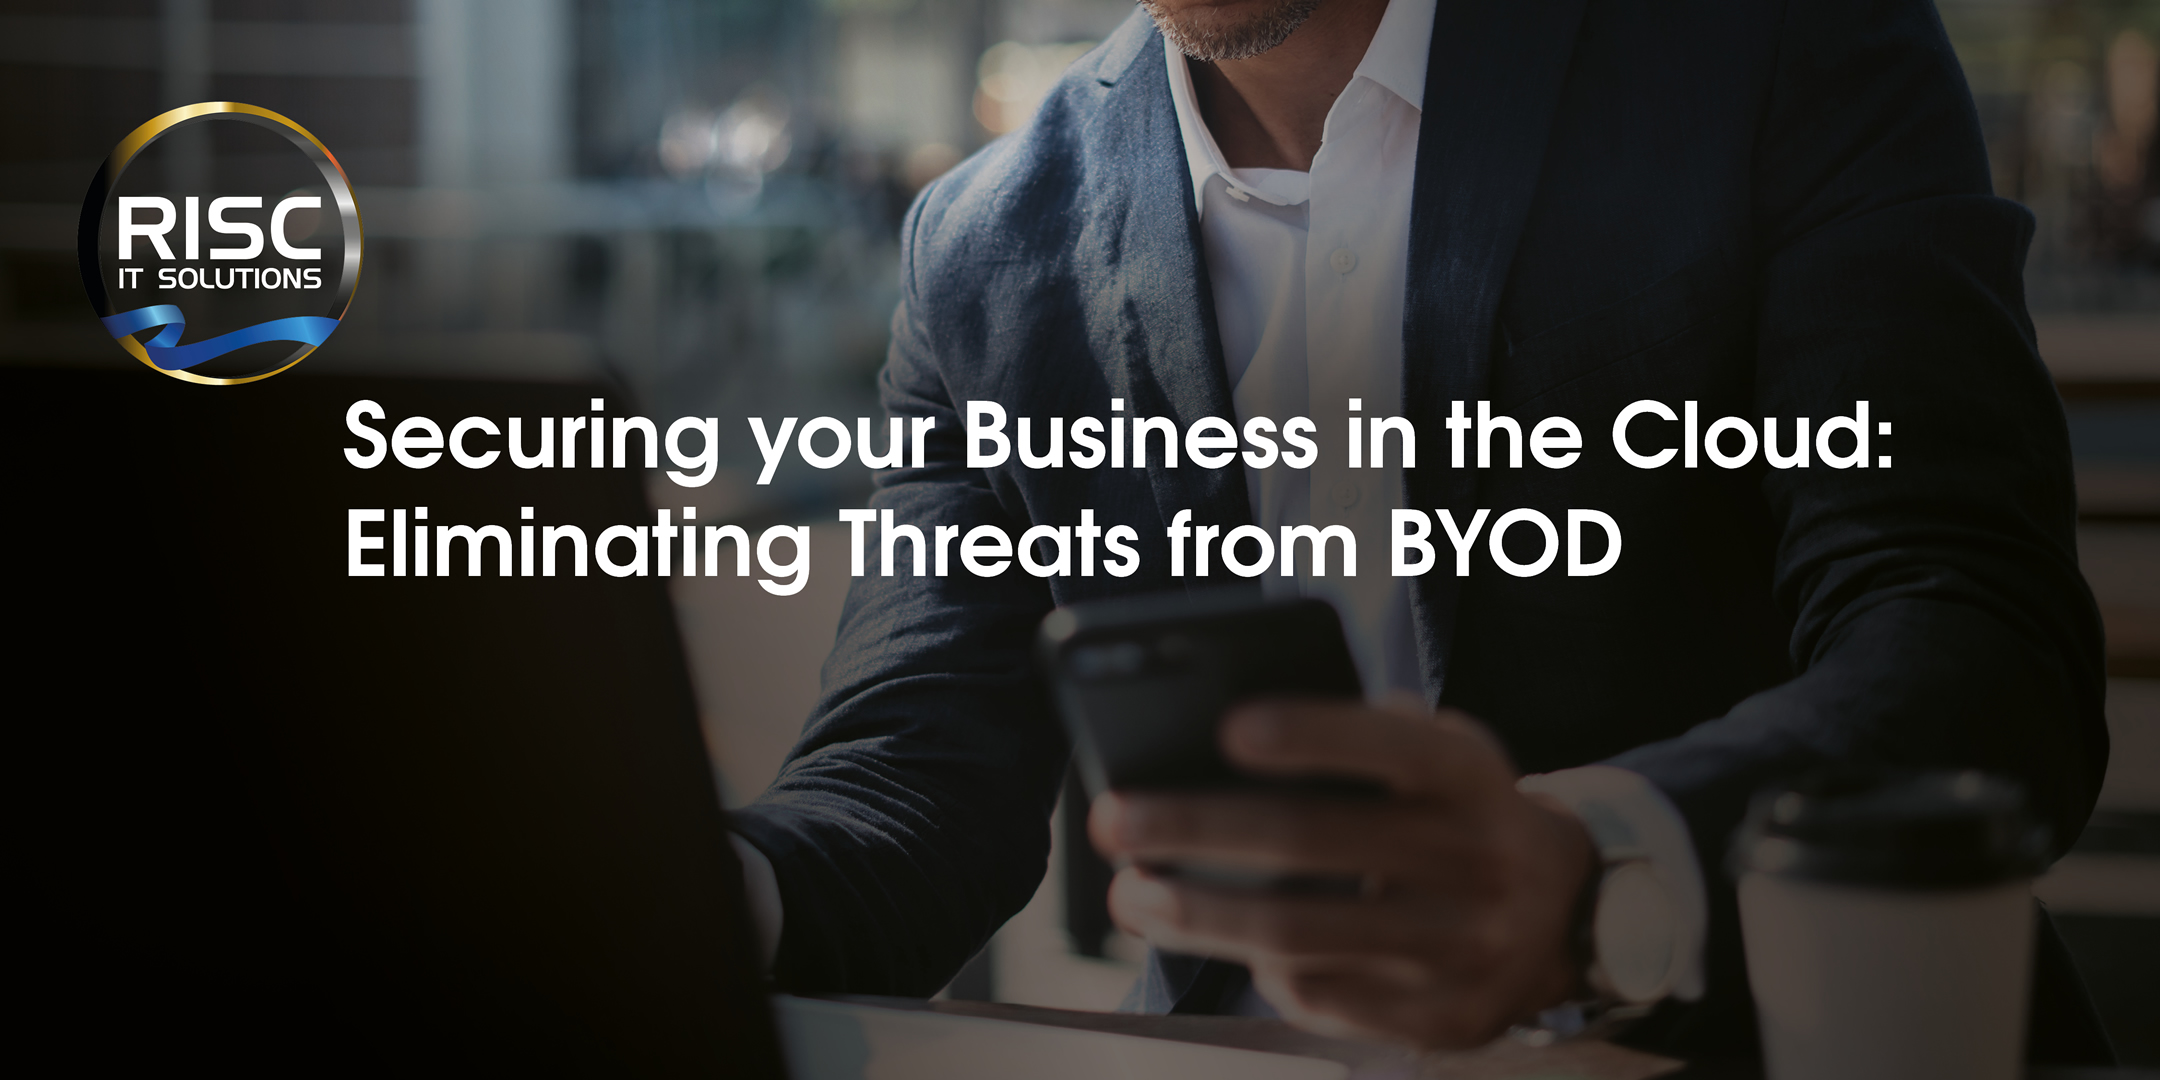 Securing your business in the Cloud - eliminating threats from BYOD - Intune